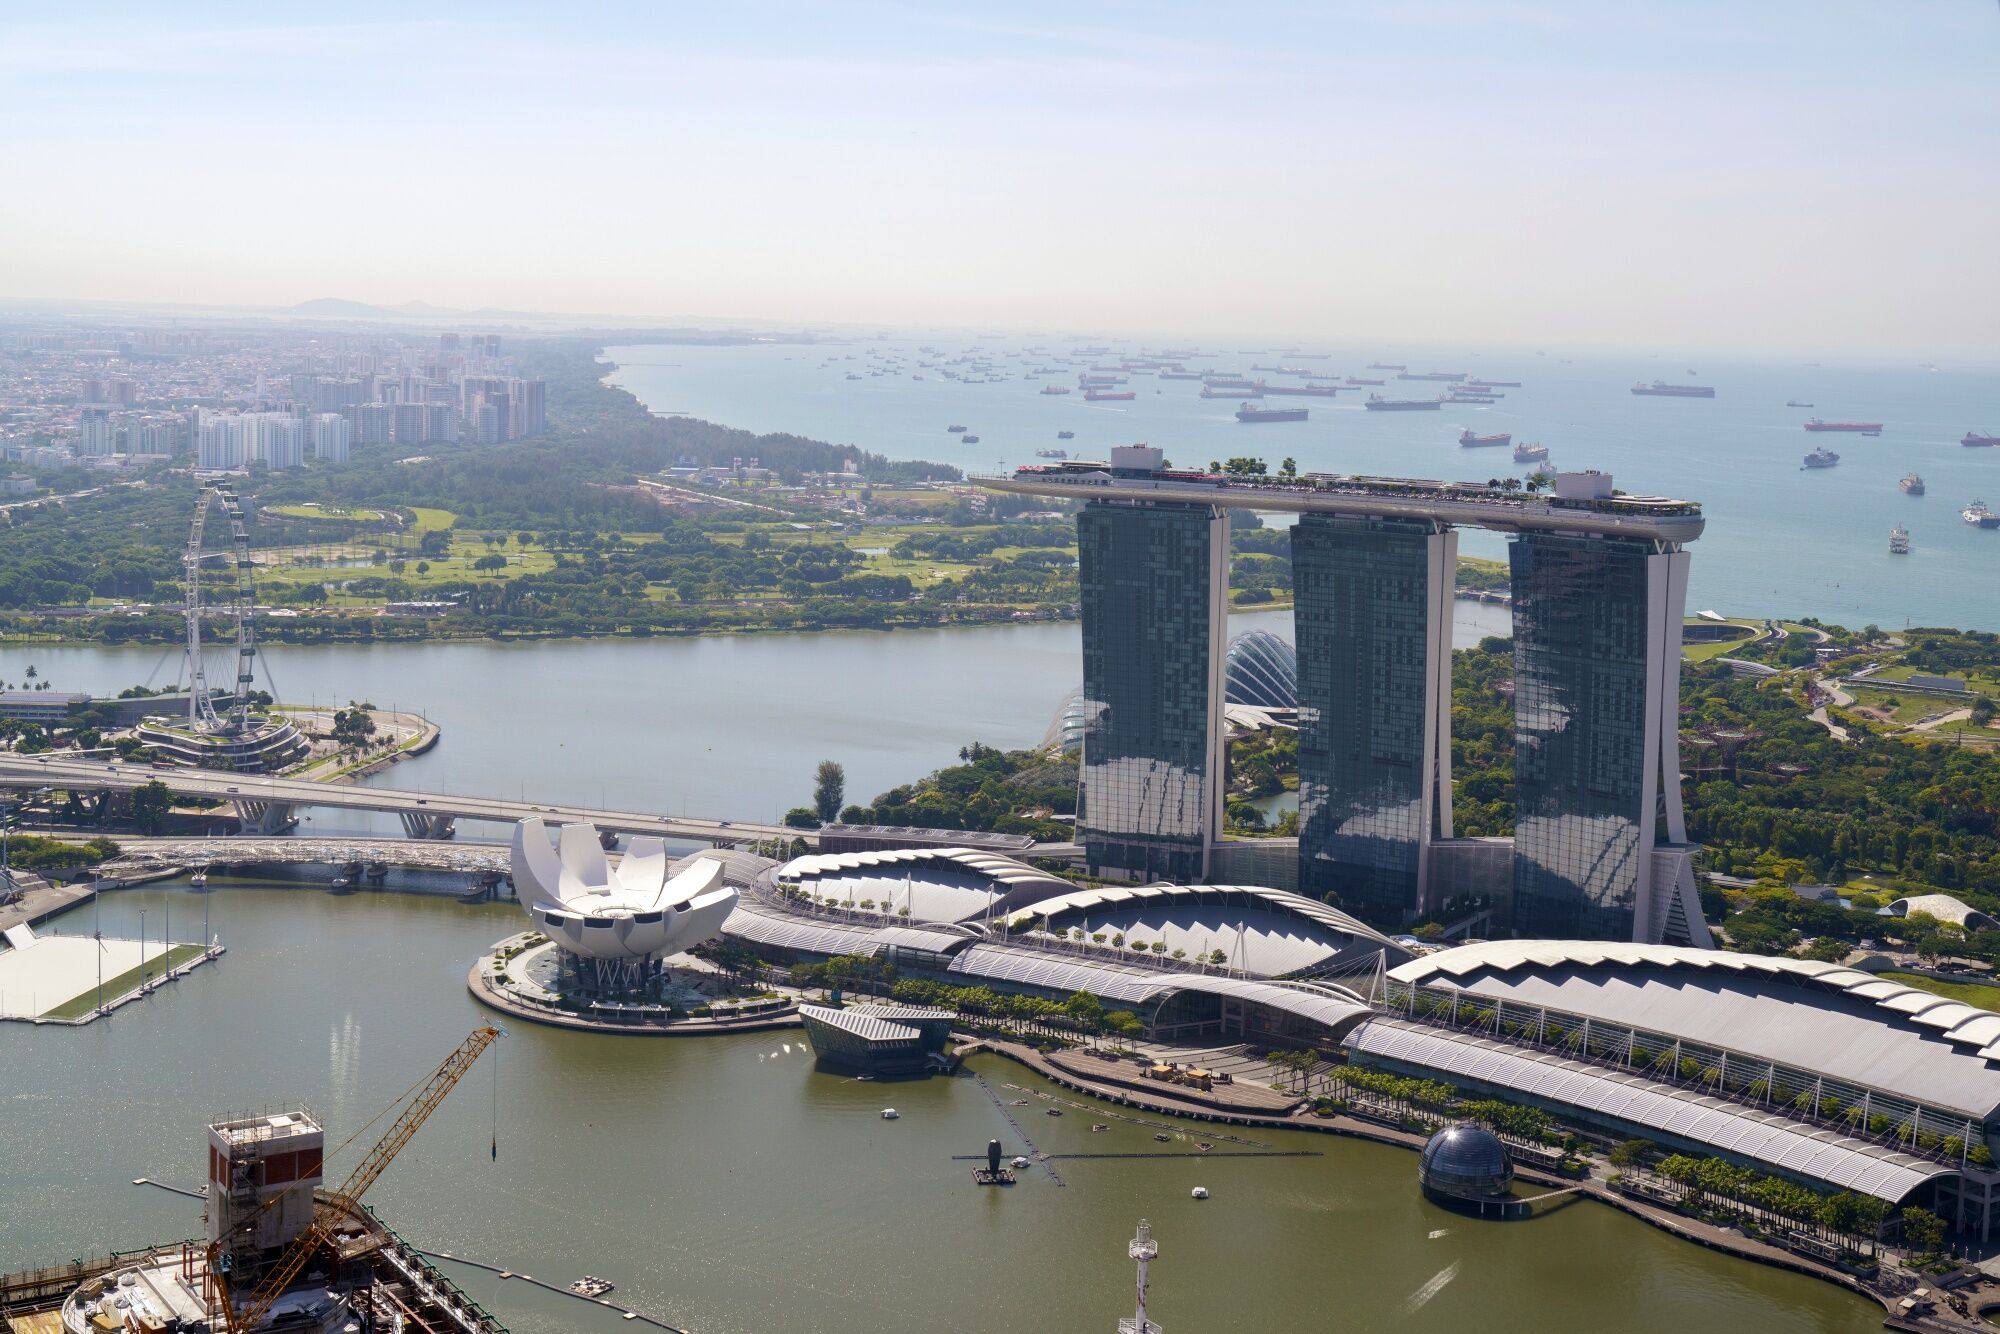 The Marina Bay Sands hotel and casino in Singapore. Rising rates in the city state hit deal-making in the hotel industry. Photo: Bloomberg